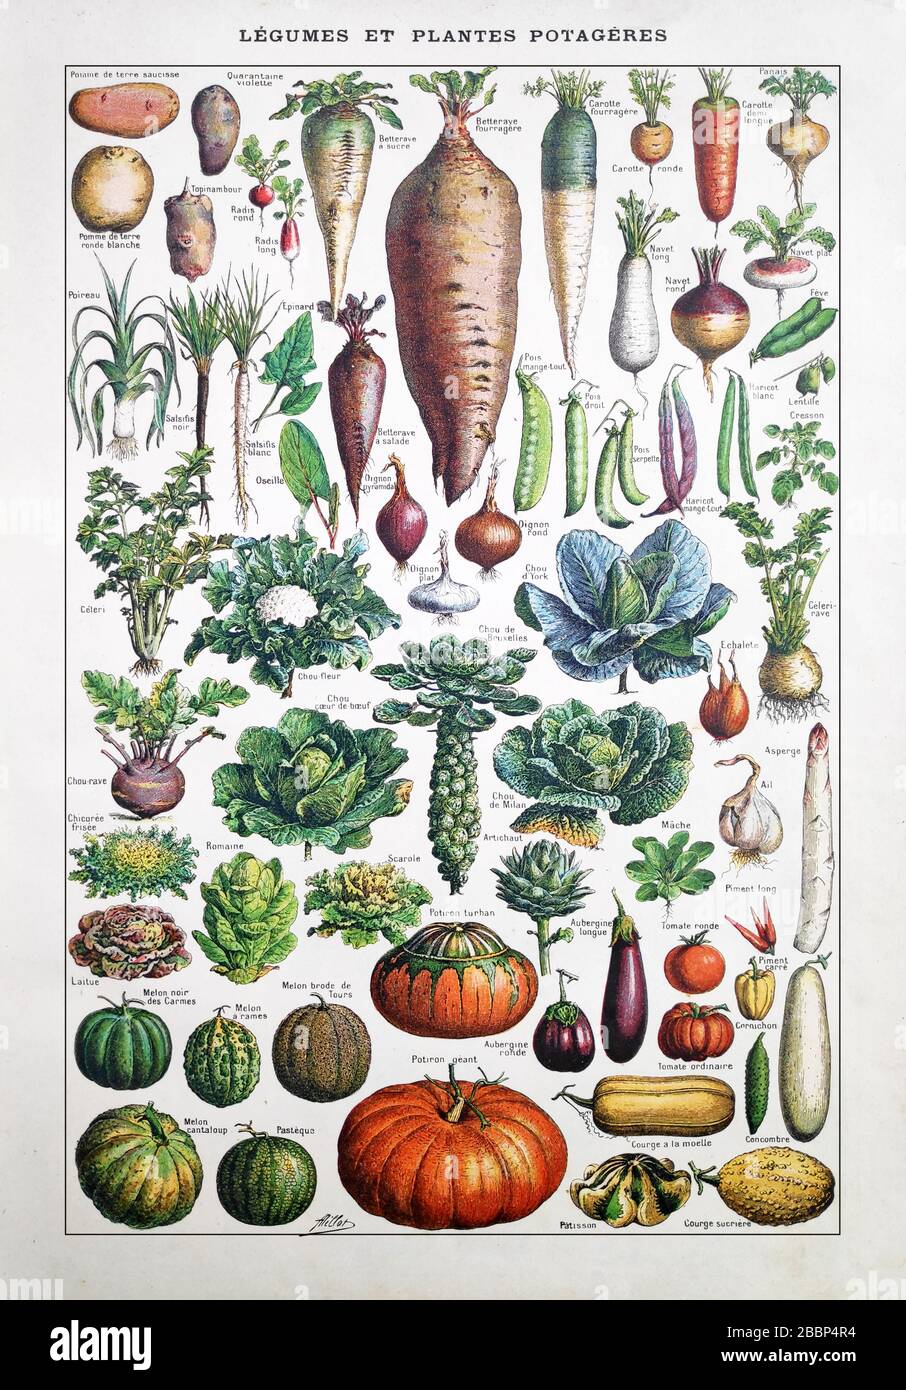 Old illustration about garden vegetables by Adolphe Philippe Millot printed in the late 19th century. Stock Photo